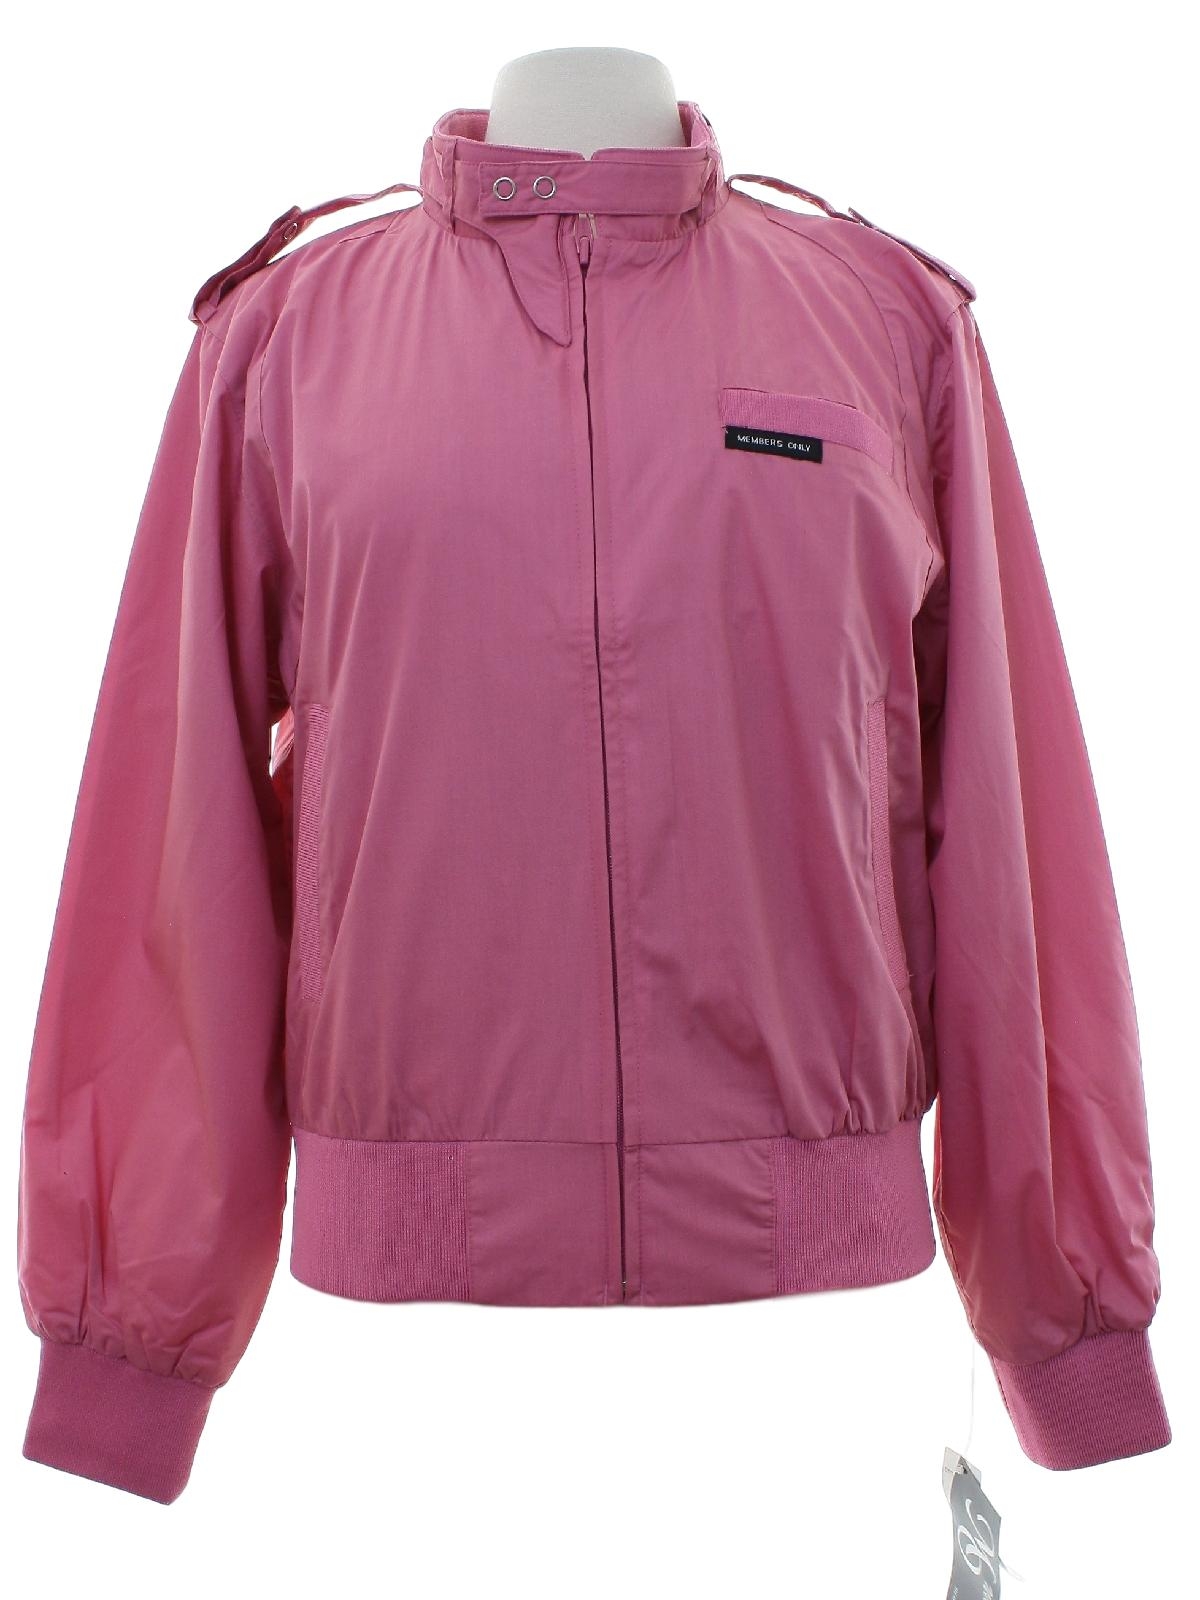 Retro 1980's Jacket (Members Only) : 80s -Members Only- Womens pink ...